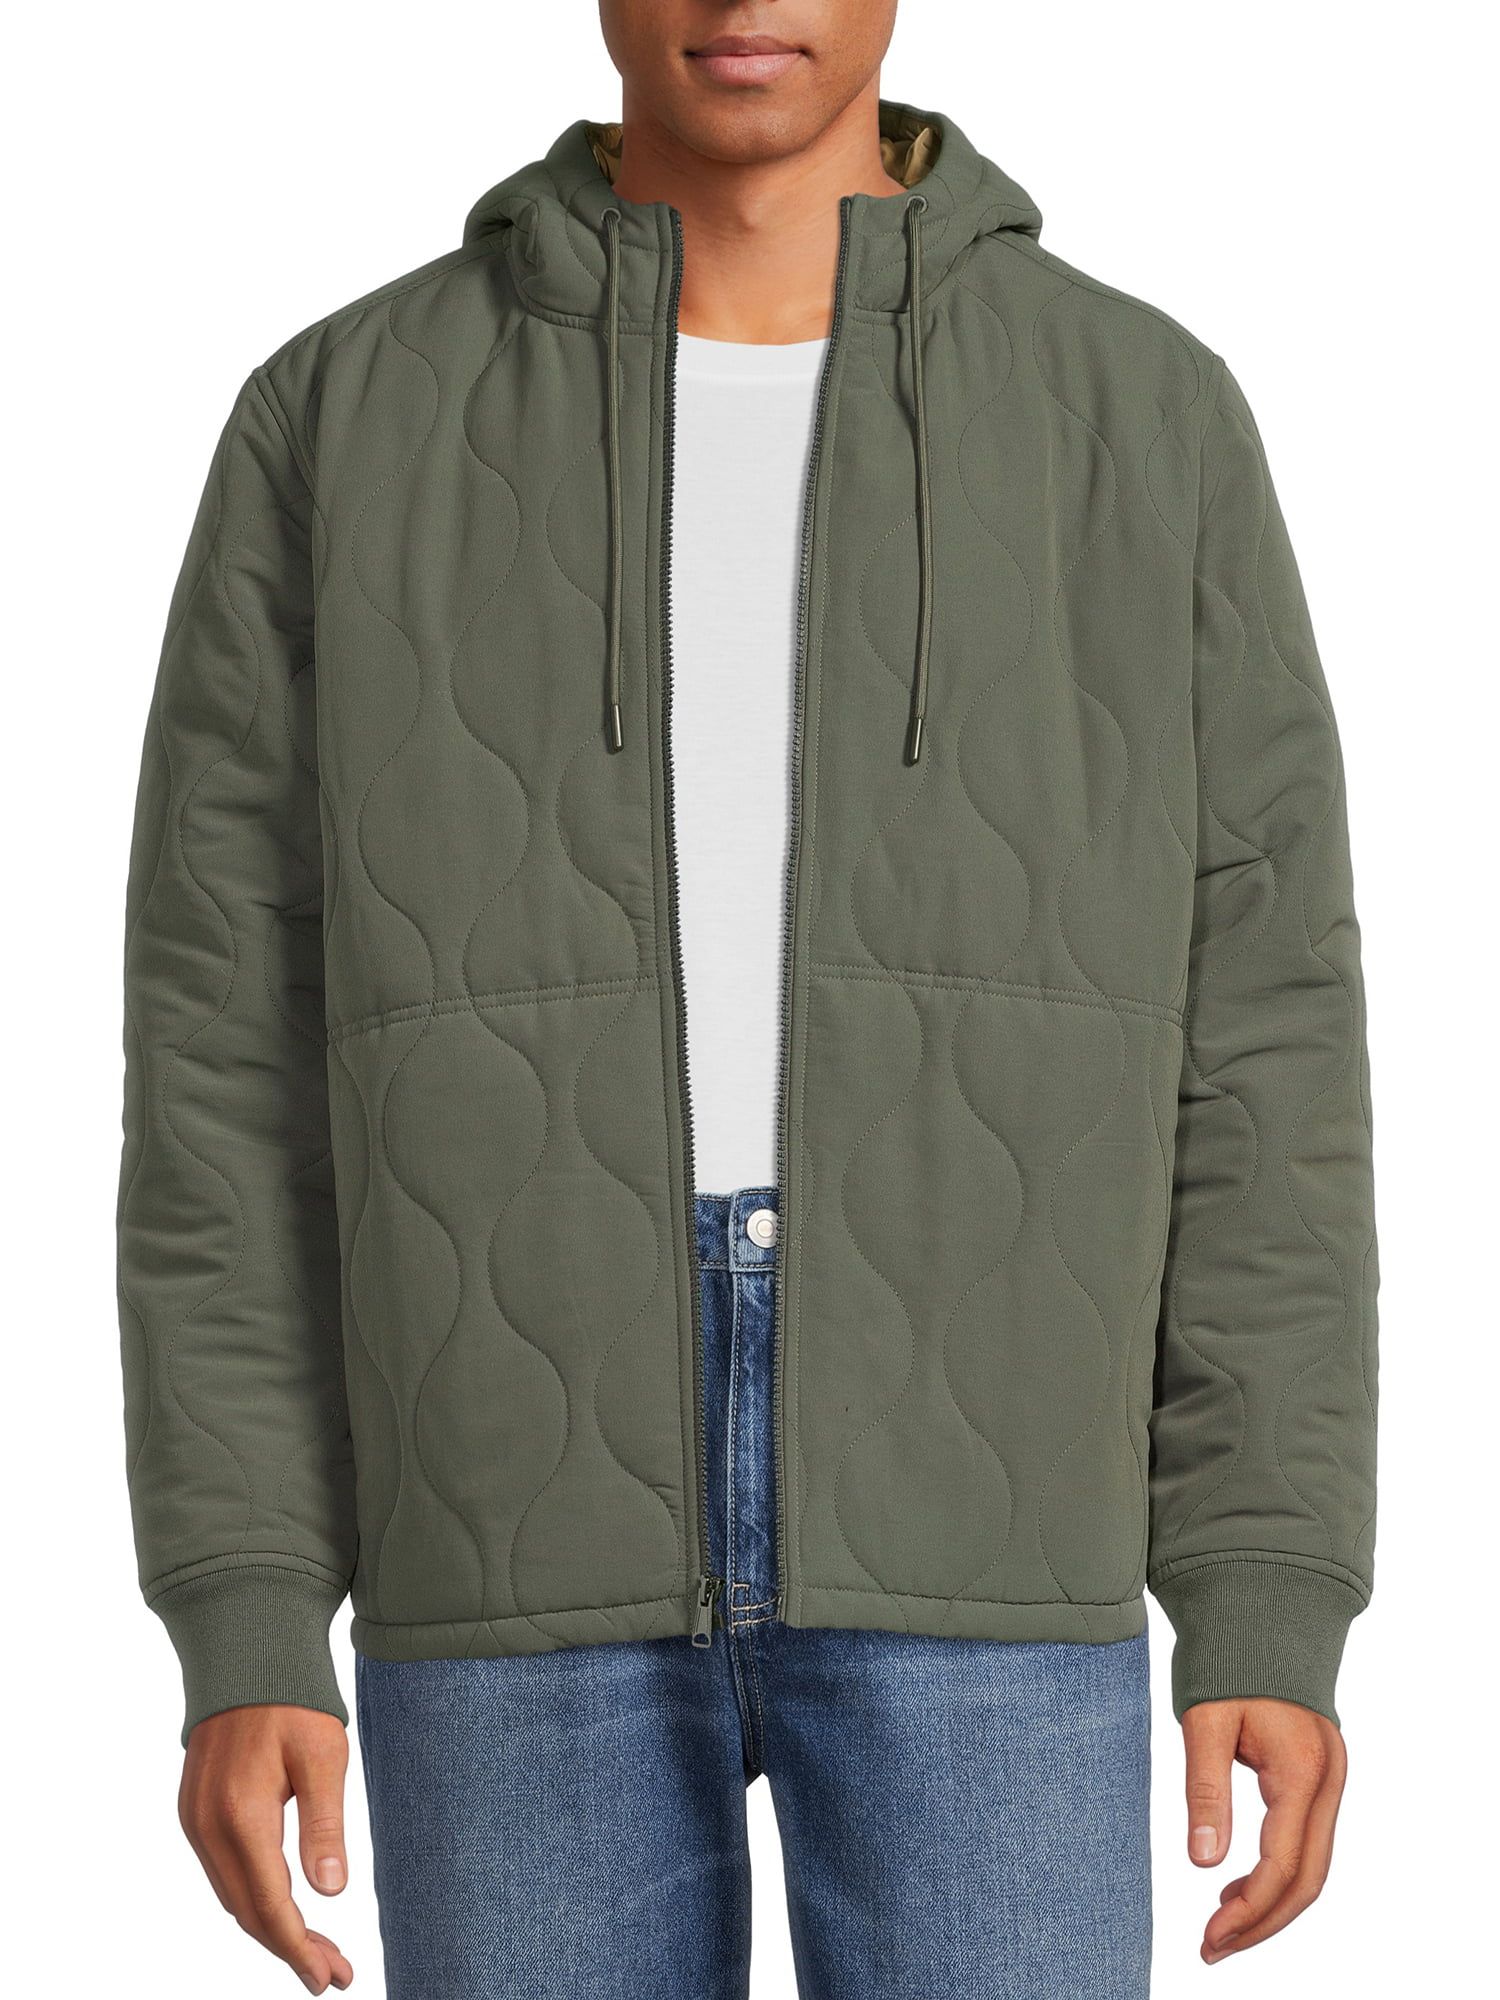 Swiss Tech Men's and Big Men's Quilted Jacket with Hood, up to Size 5XL | Walmart (US)